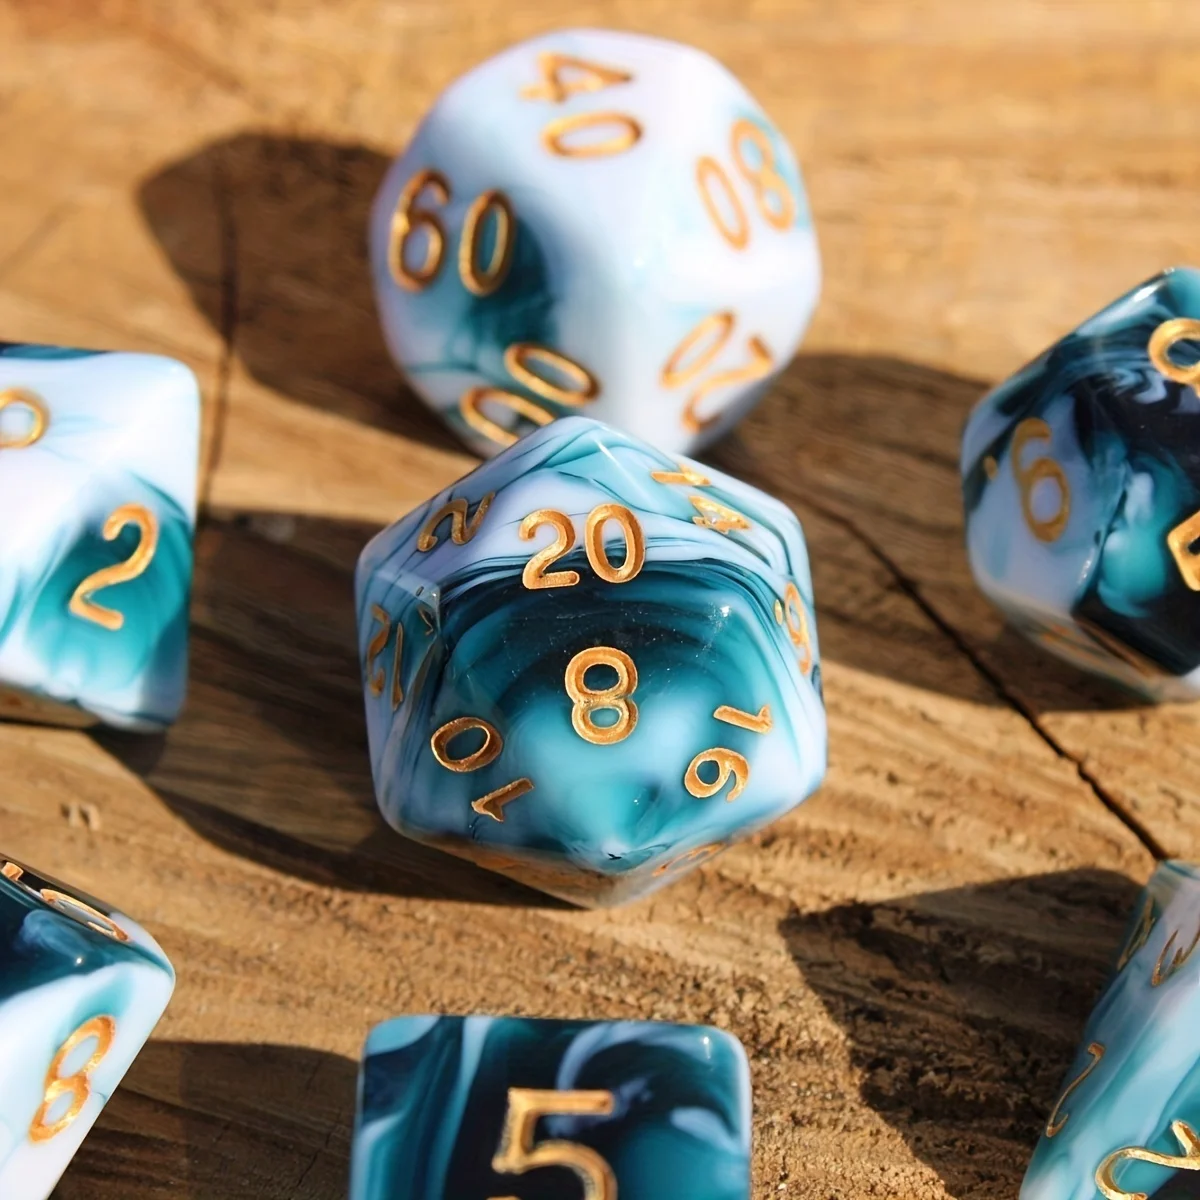 7Pcs/Set Blueberry Marble Dice for DND Dungeons and Dragons Table Games D&D RPG Tabletop Roleplaying фигурка numskull tubbz dungeons and dragons ranger